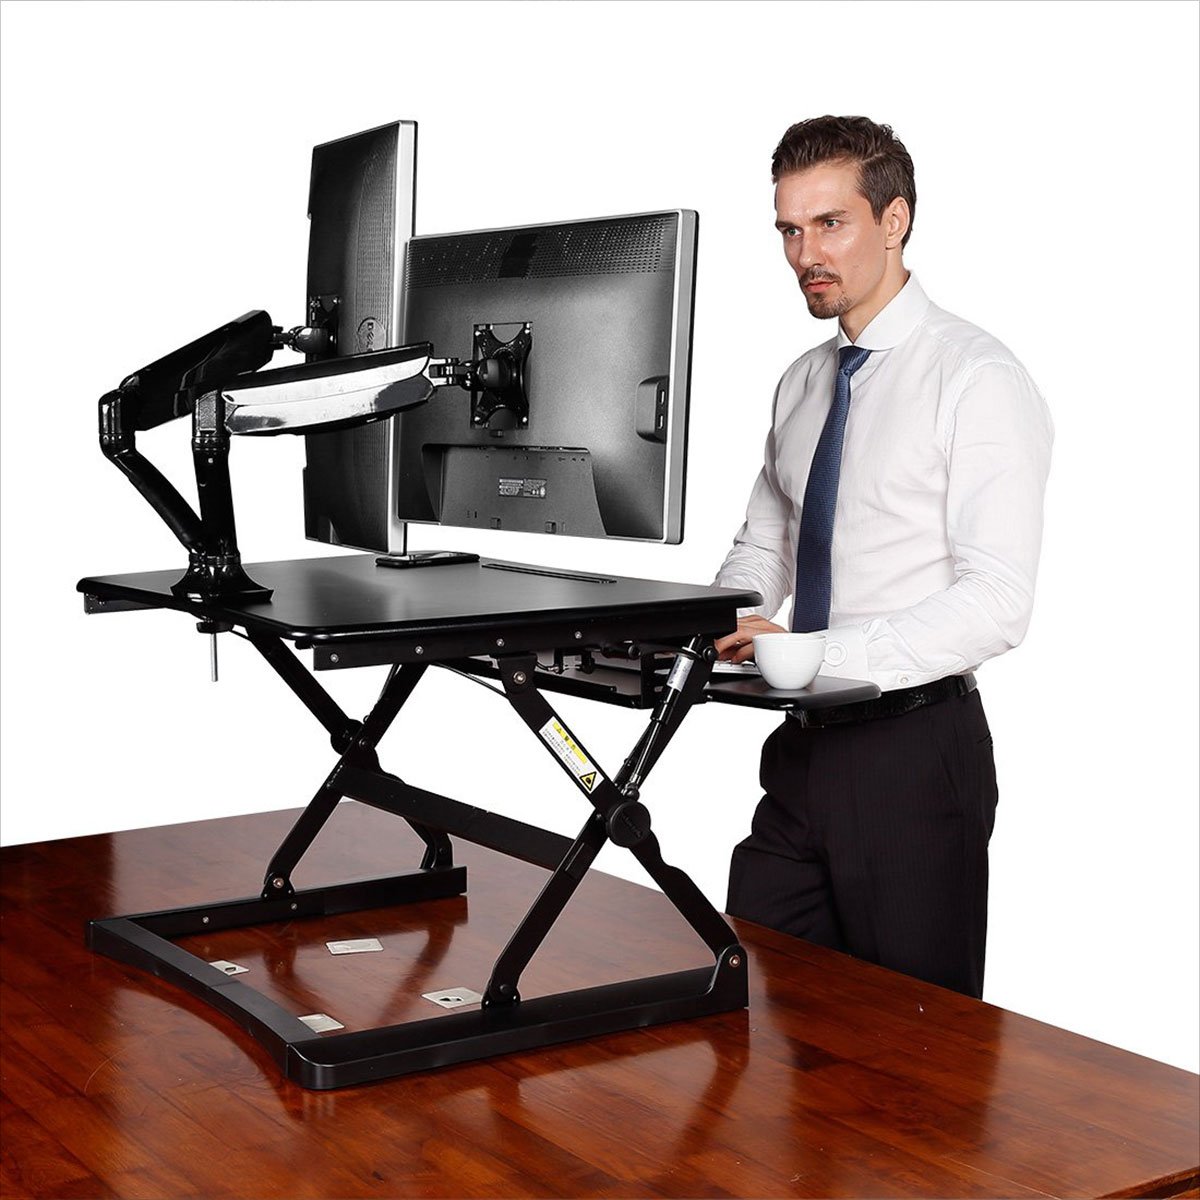 Curved Best Standing Desk For Laptop And Monitor with RGB